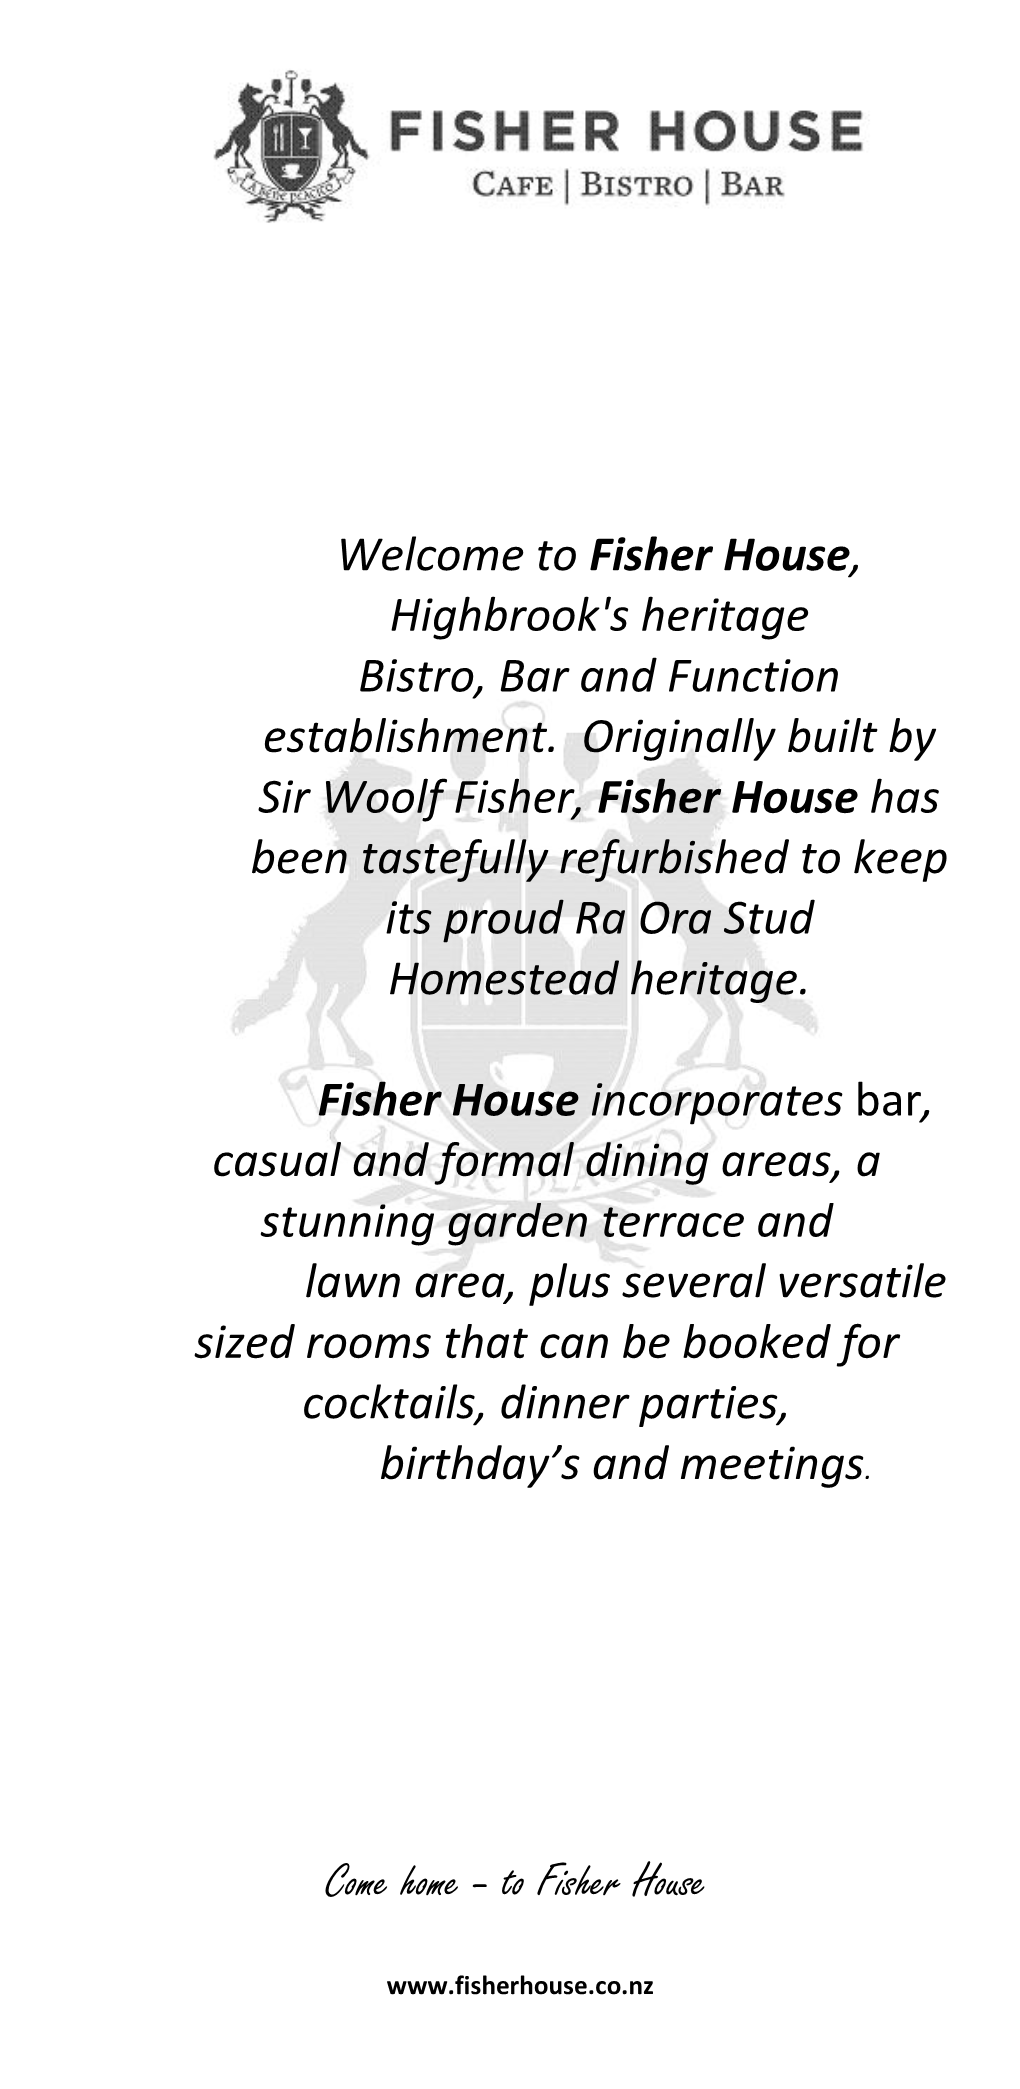 Fisher House, Highbrook's Heritage Bistro, Bar and Function Establishment